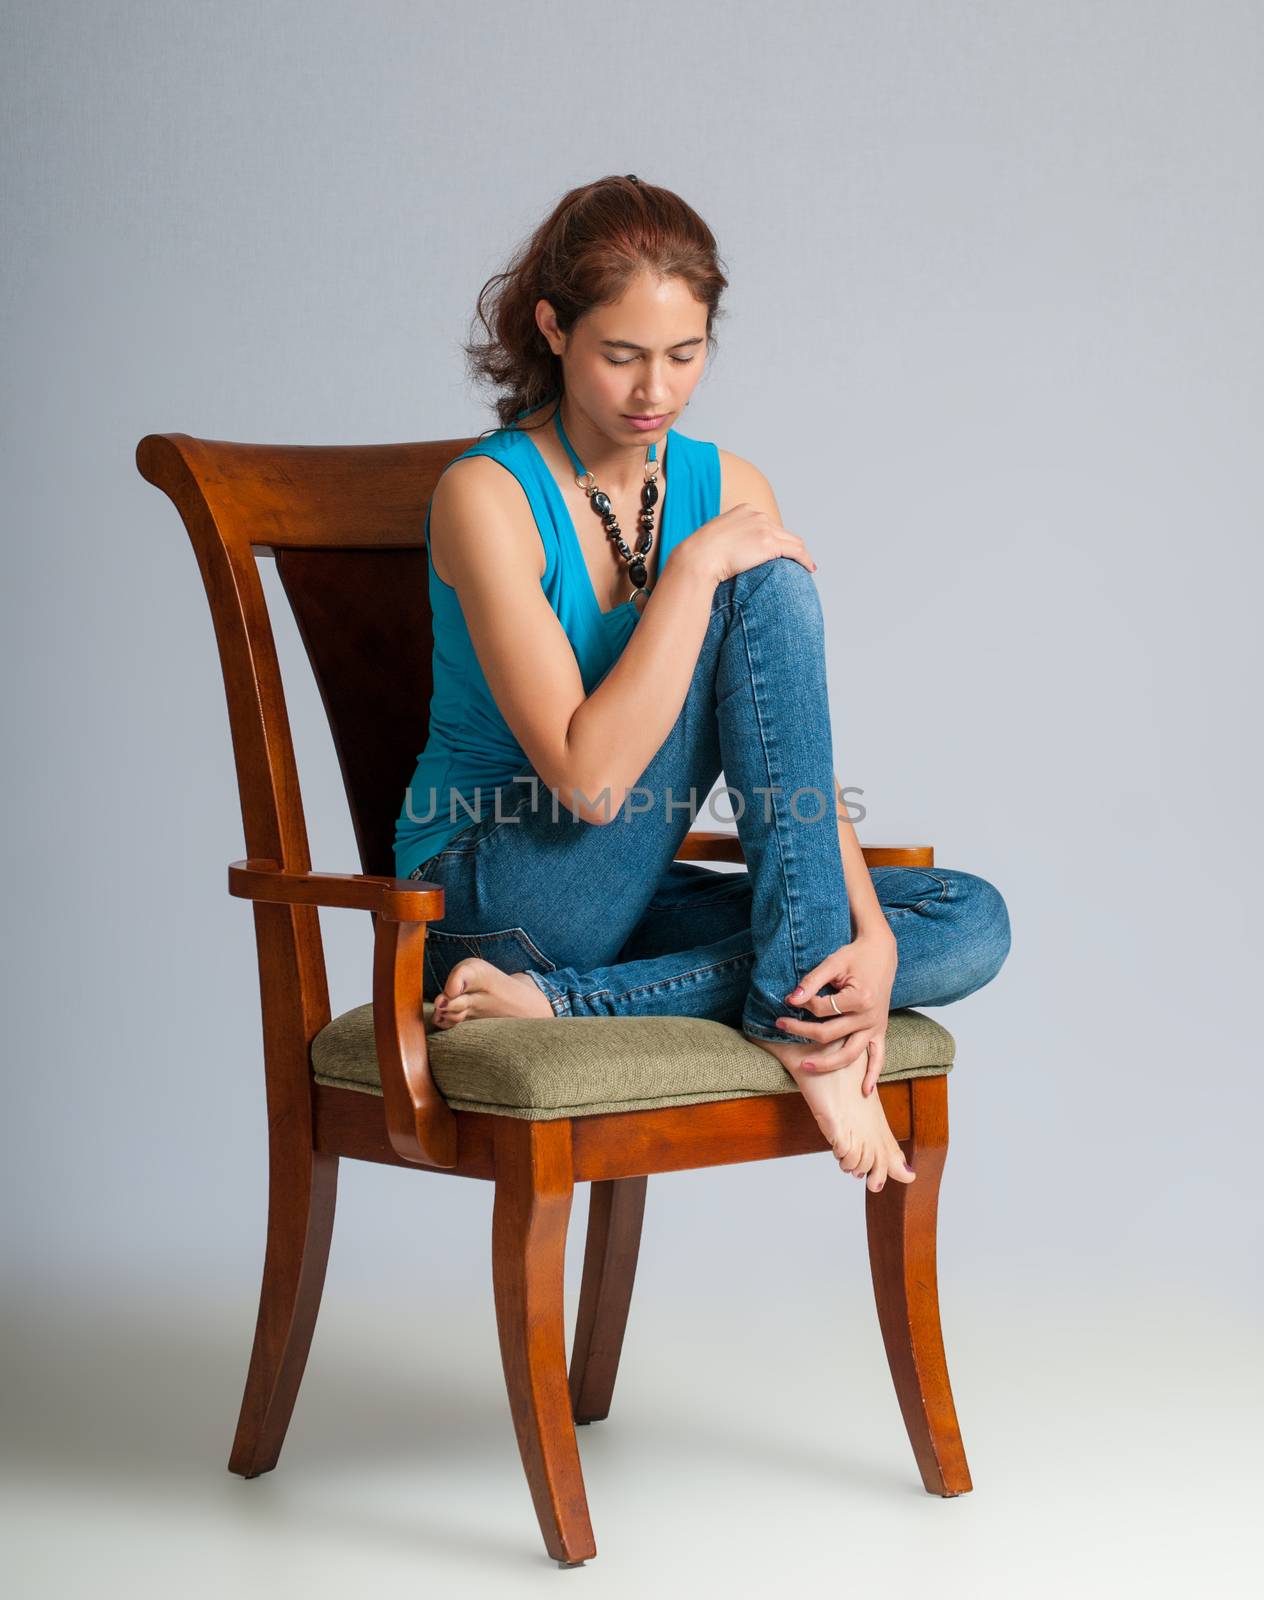 Pretty young brunette deep in thought as she sits in a padded arm chair.